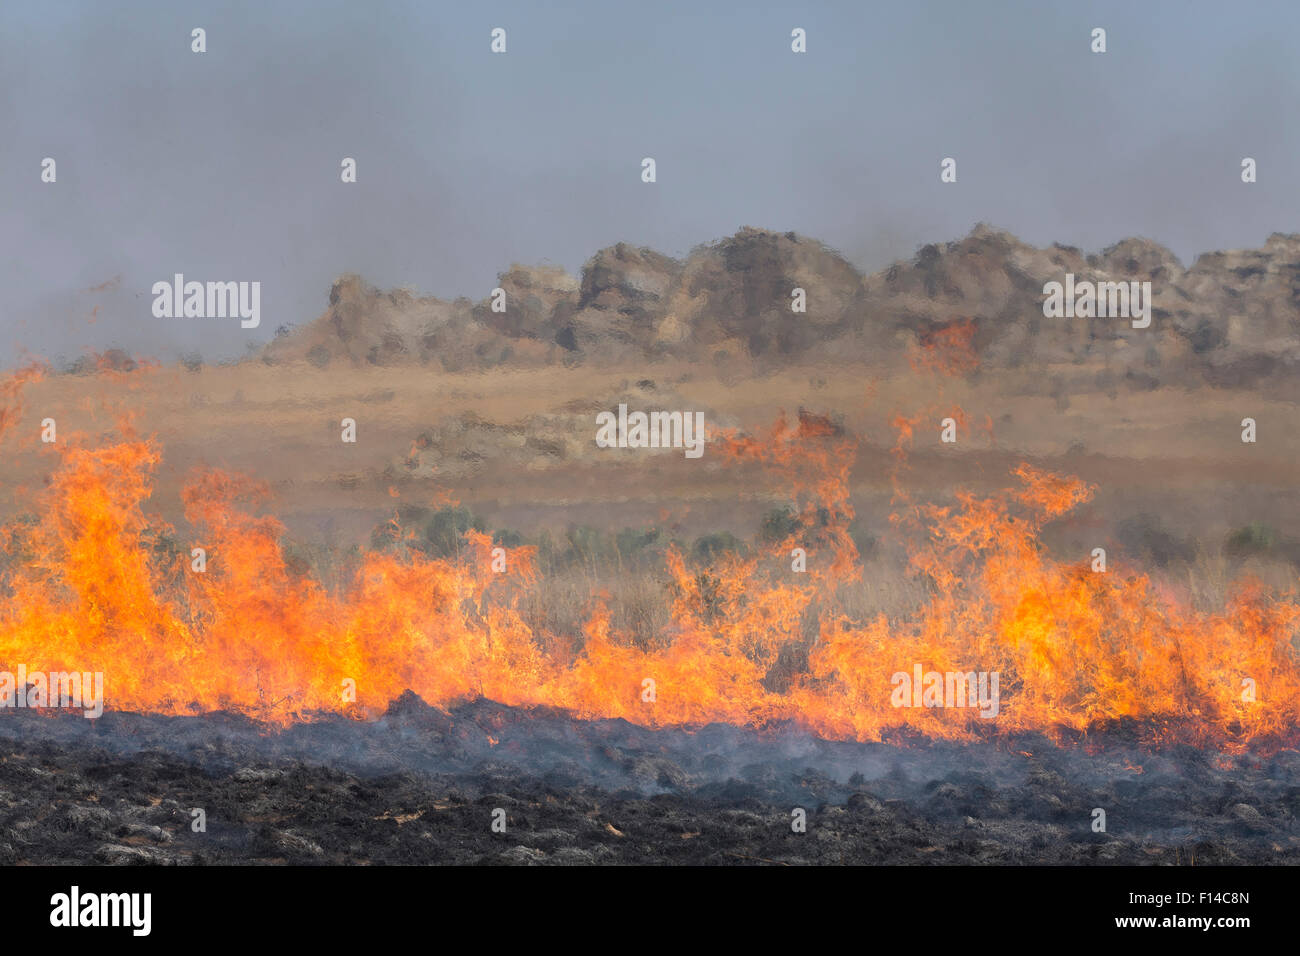 Fire set by farmer to kill migrating locusts (Locusta migratoria capito). Very often the fire gets out of control and destroys many hectares of grassland. Near Isalo National Park, Madagascar. August 2013. Stock Photo